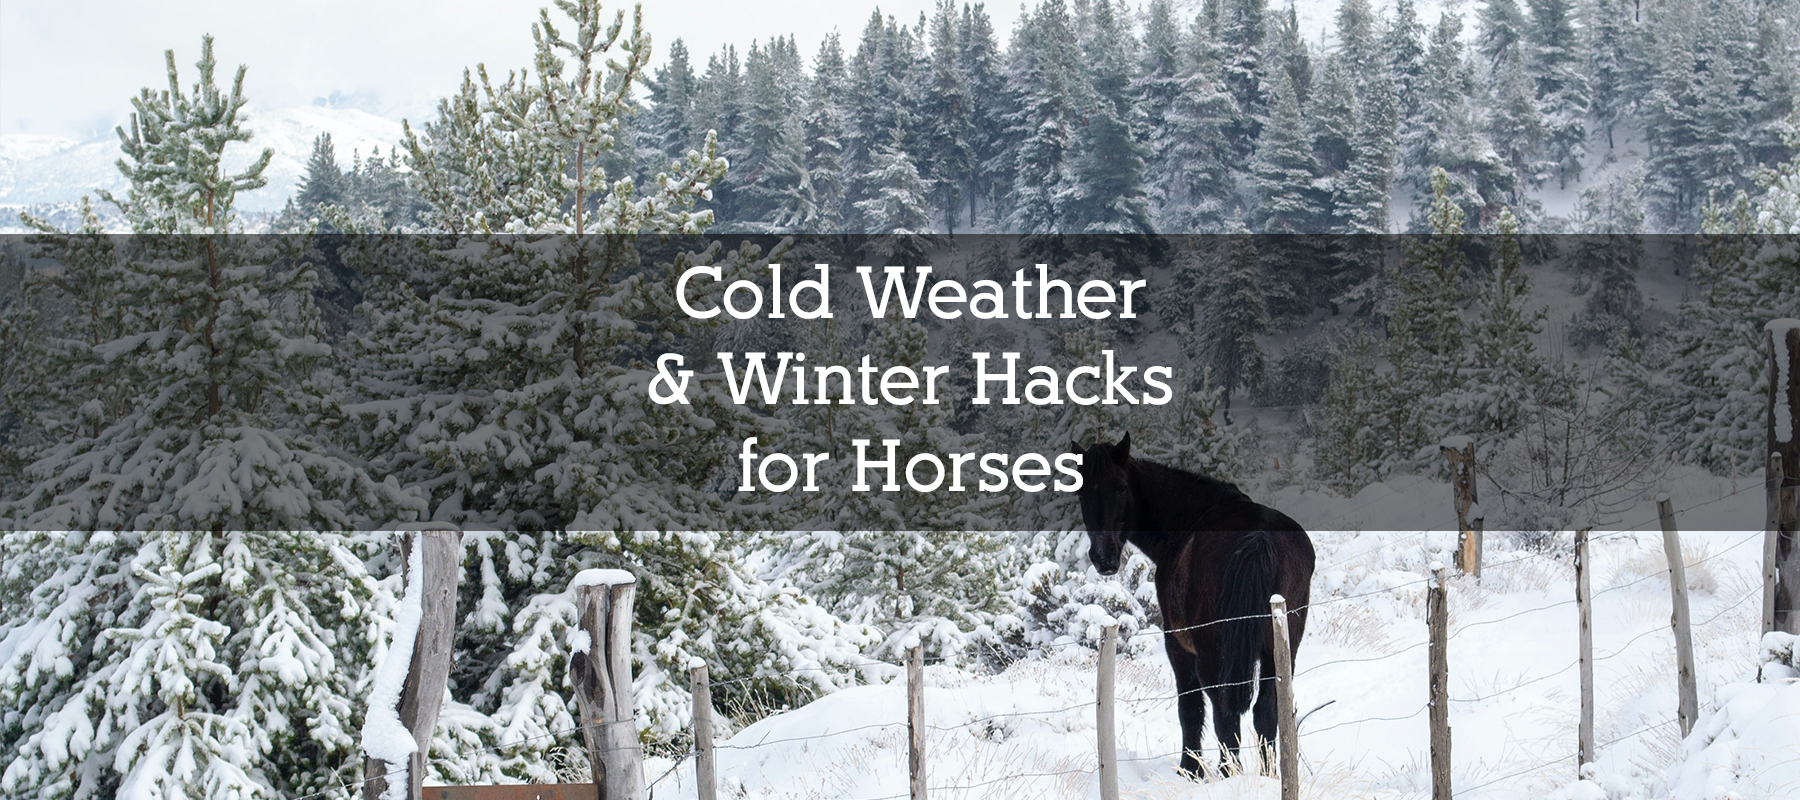 Cold Weather & Winter Hacks for Horses